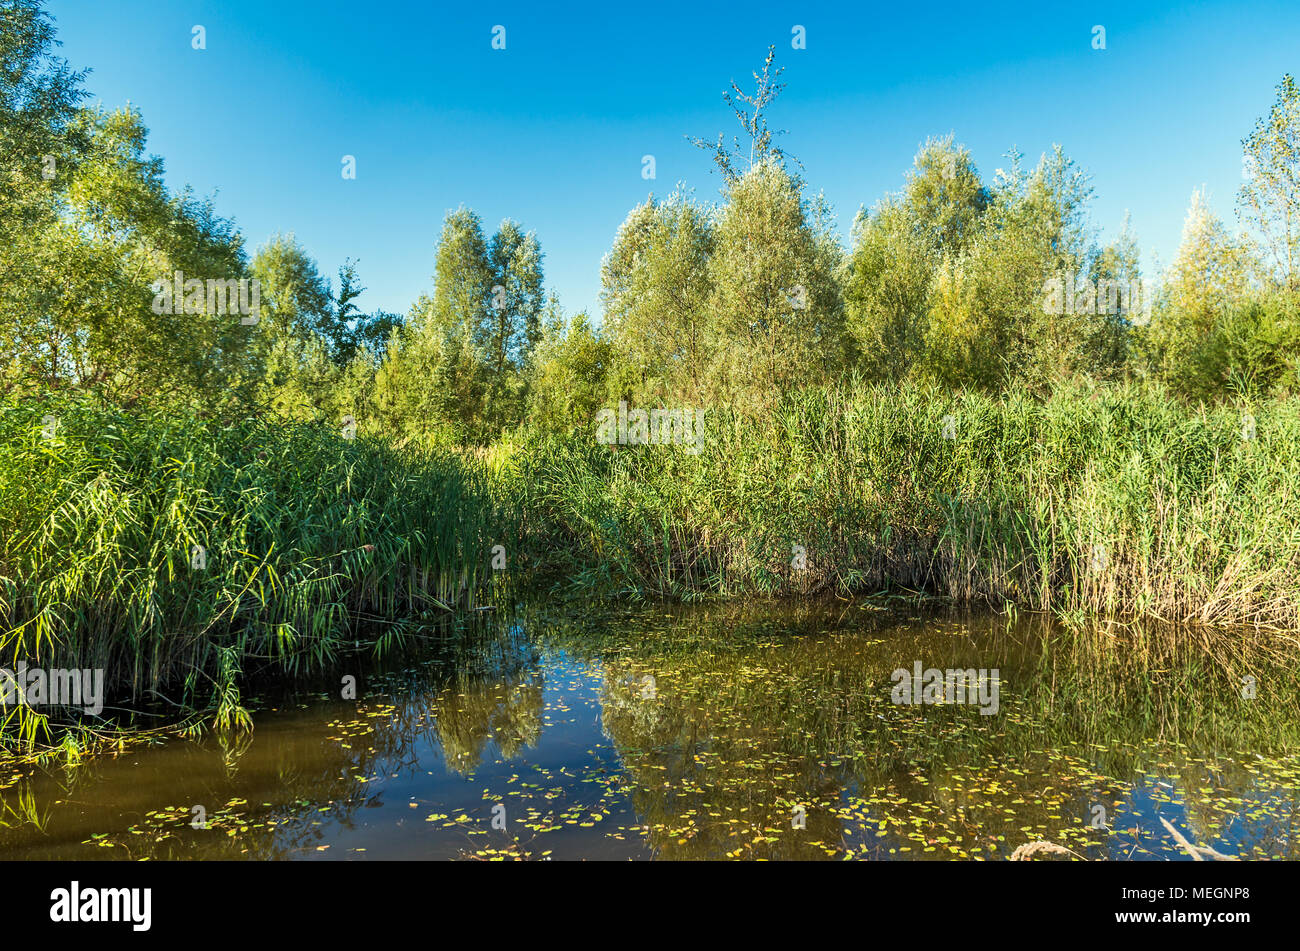 Pond with water lillies in the summer in Zabrze, Silesian Upland, Poland. Stock Photo